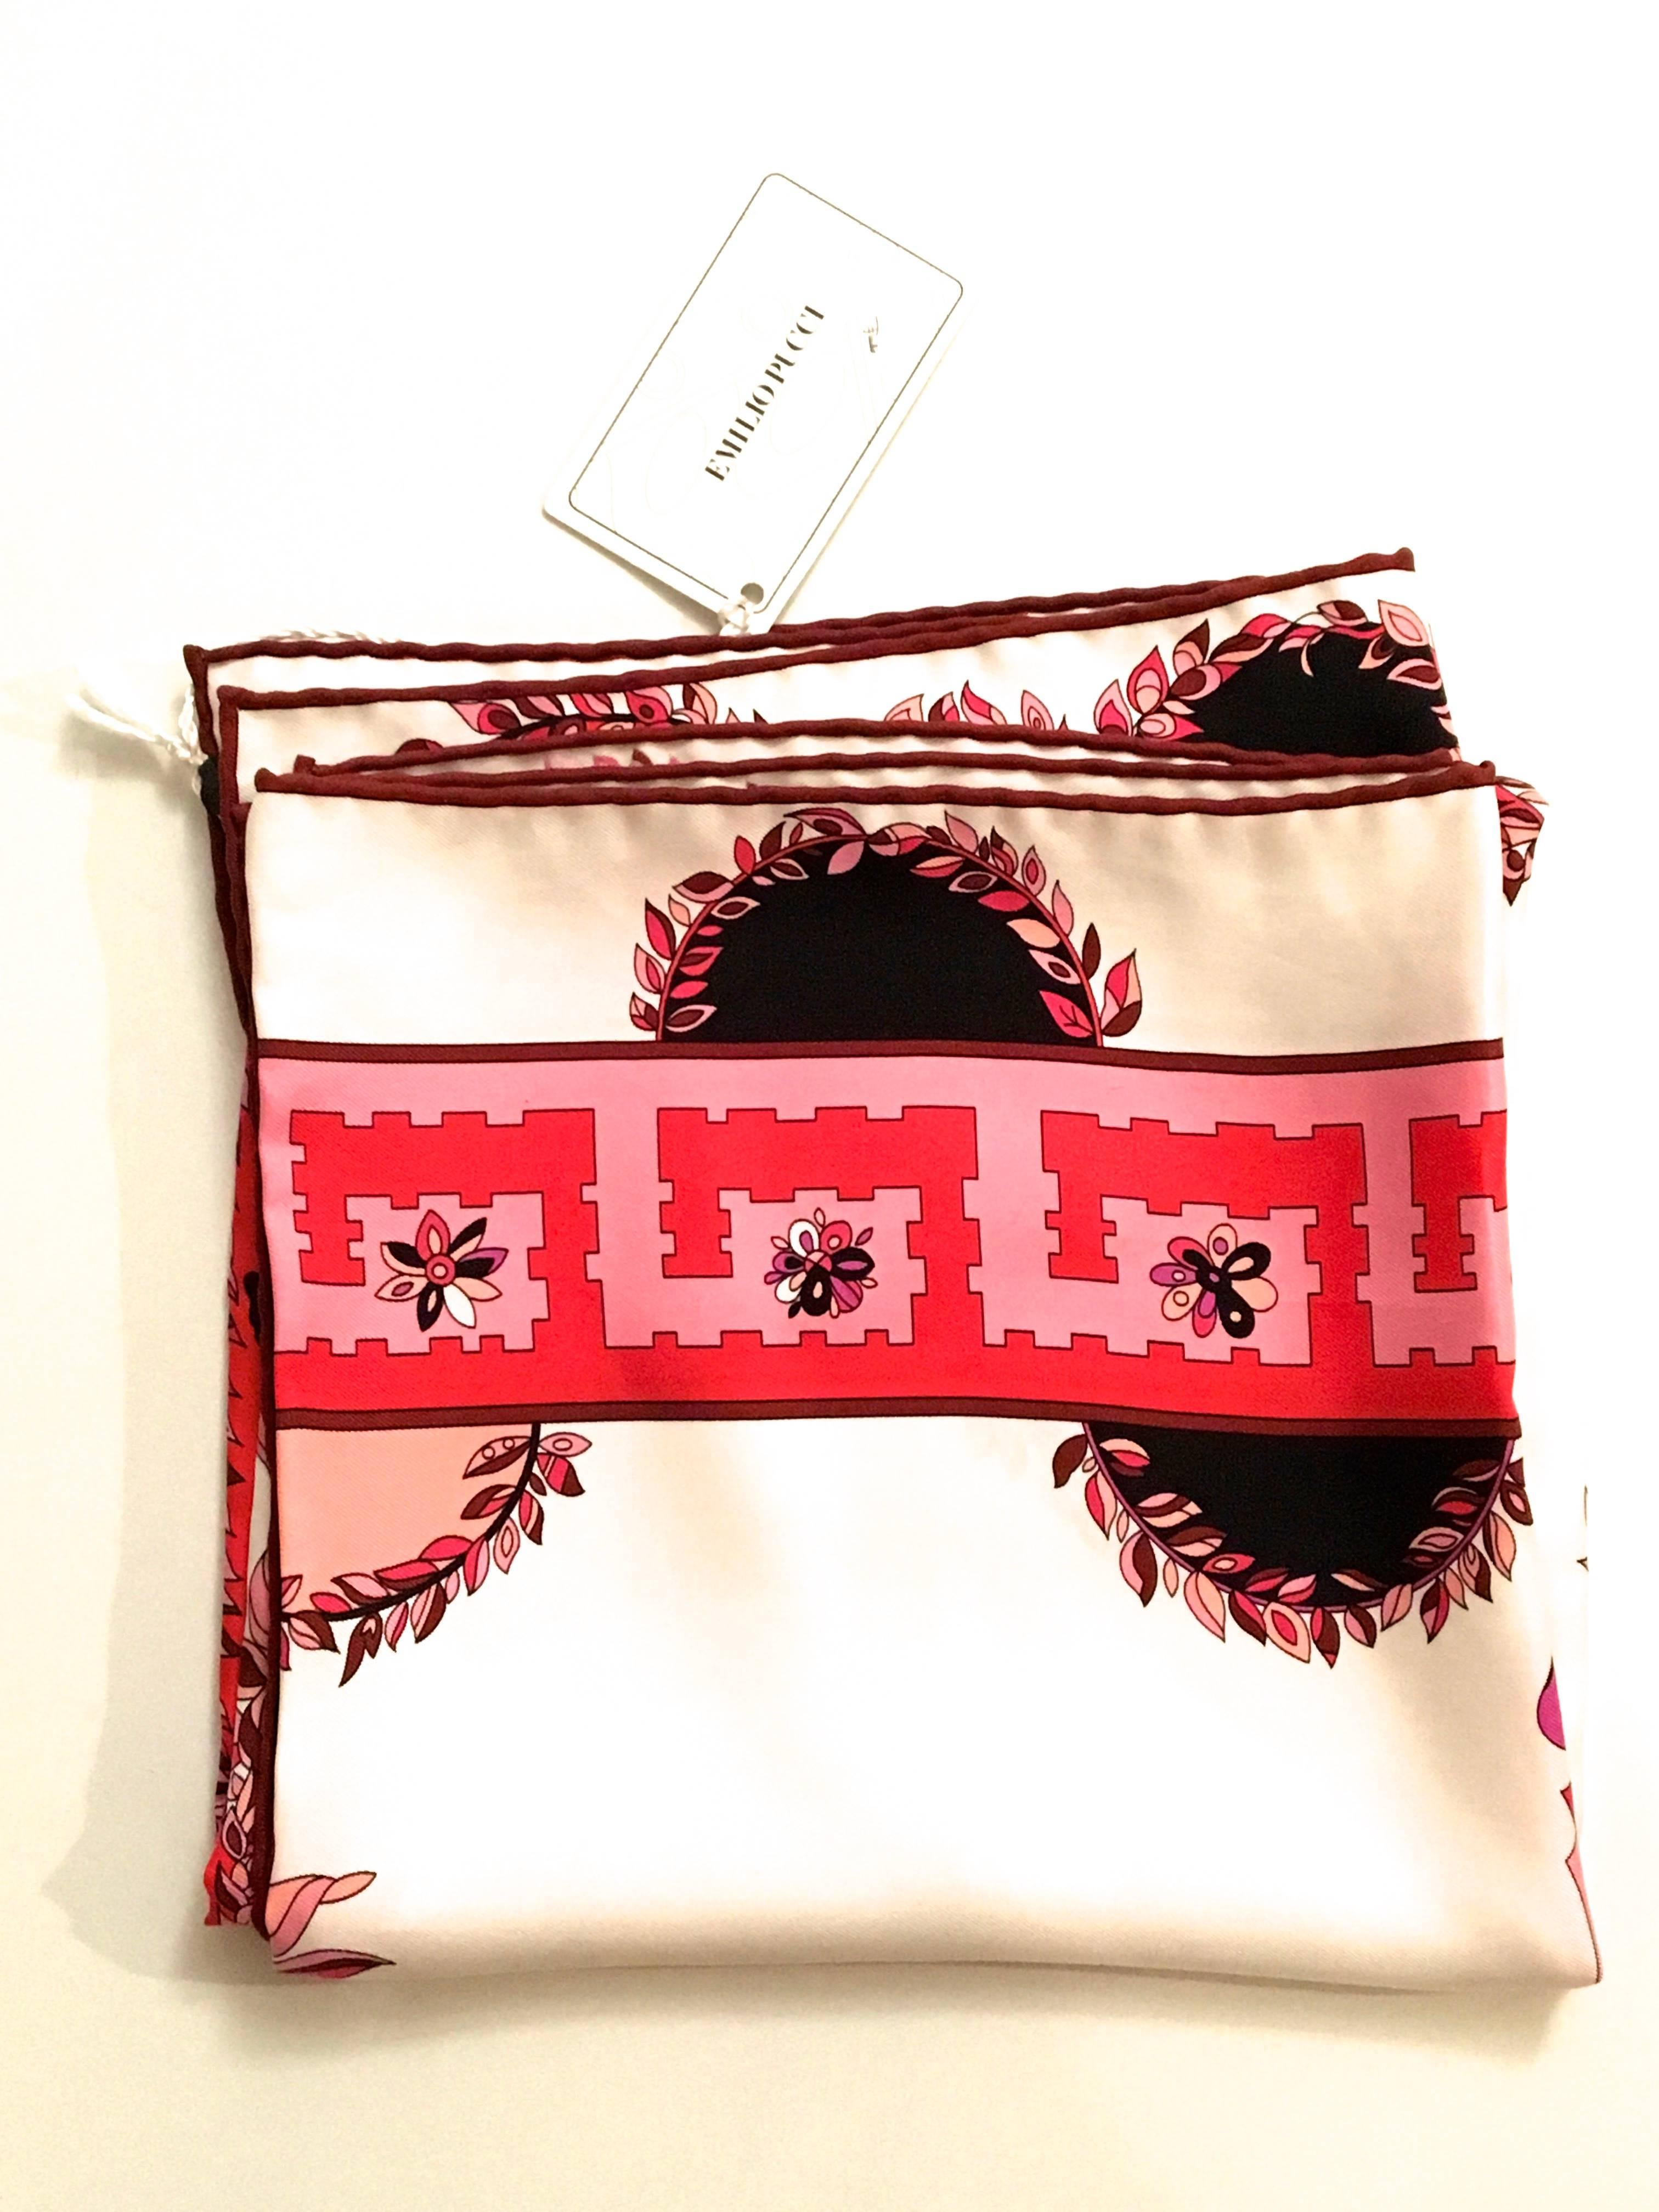 Presented here is a new beautiful Emilio Pucci elaborate silk print scarf. The scarf is square and is comprised of a design that is shades of magenta, red, white, purple, black and pink. As with all Emilio Pucci designs, this scarf is absolutely